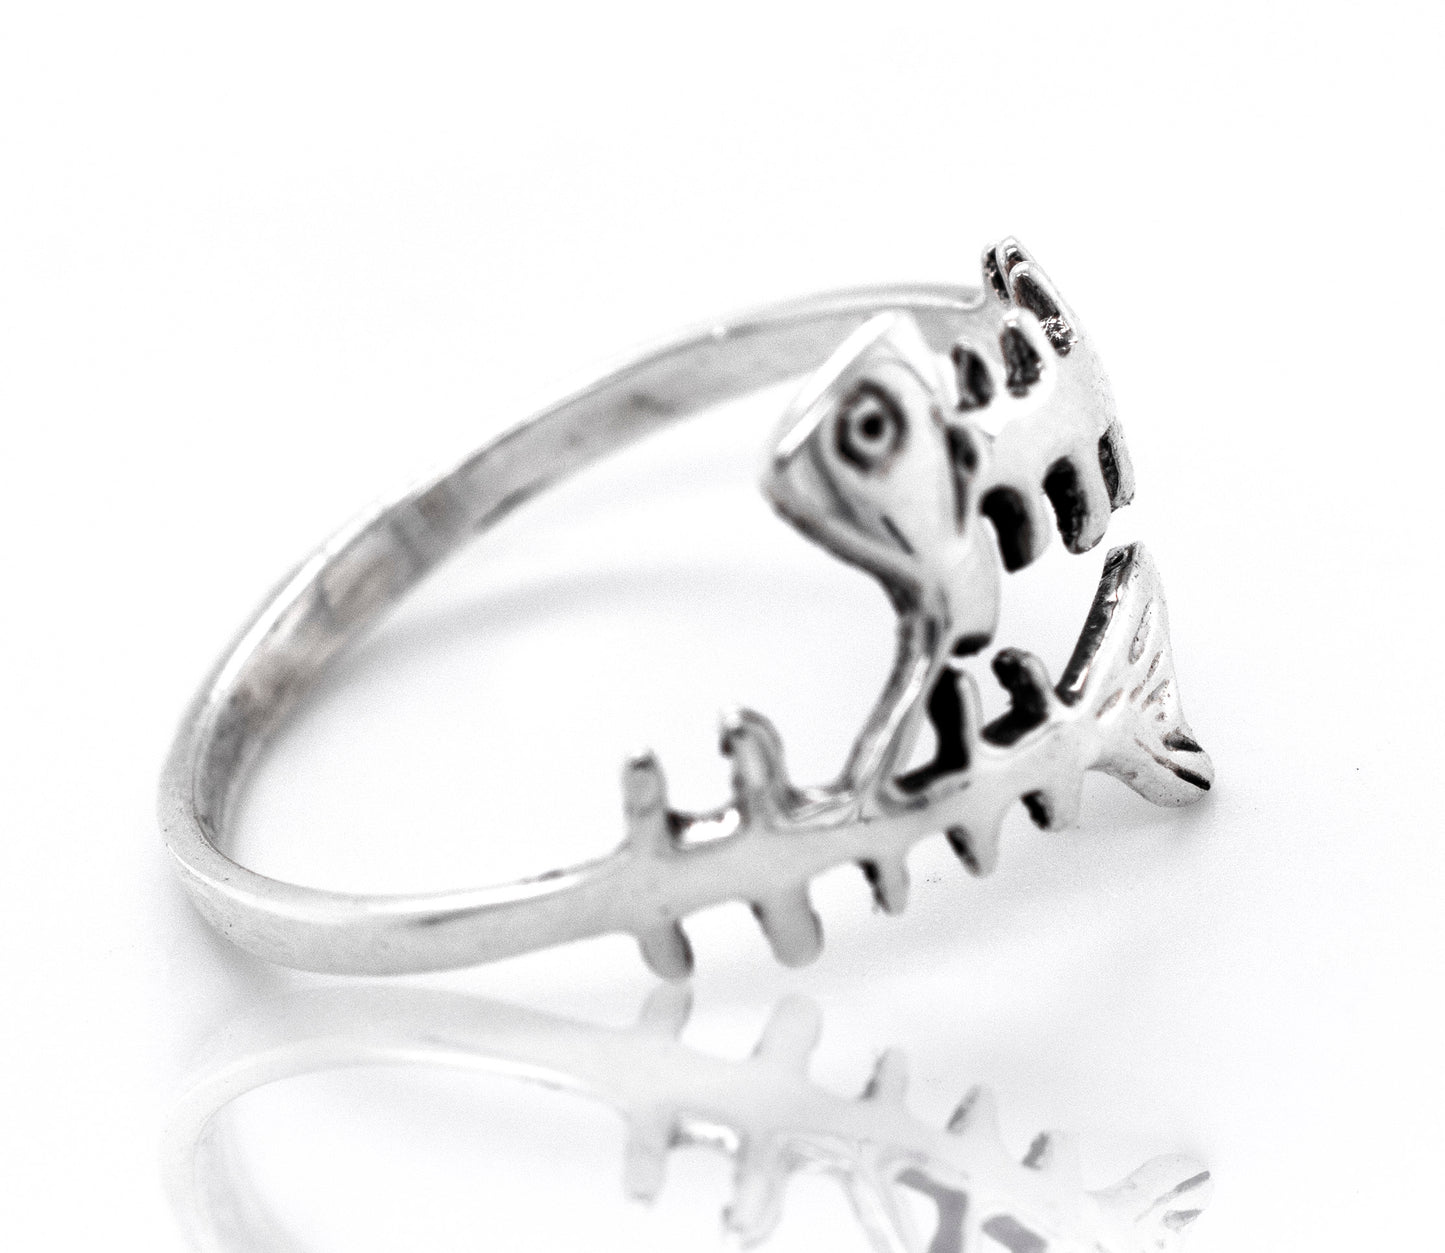 A sterling silver Fish Skeleton Ring inspired by the ocean.